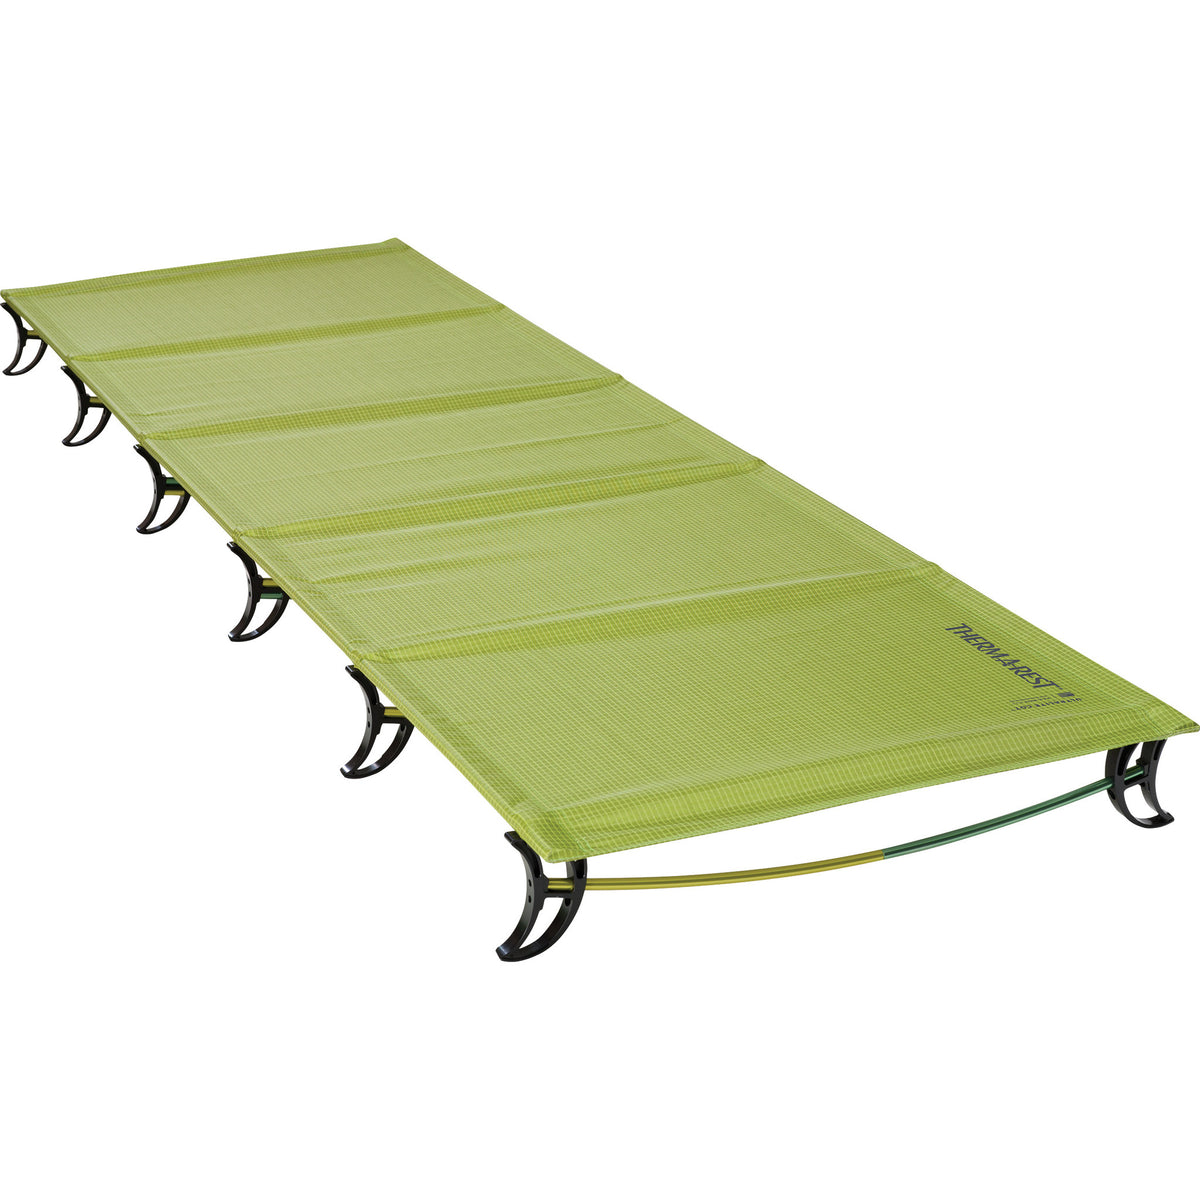 Thermarest - UltraLite Cot - Frontenac Outfitters